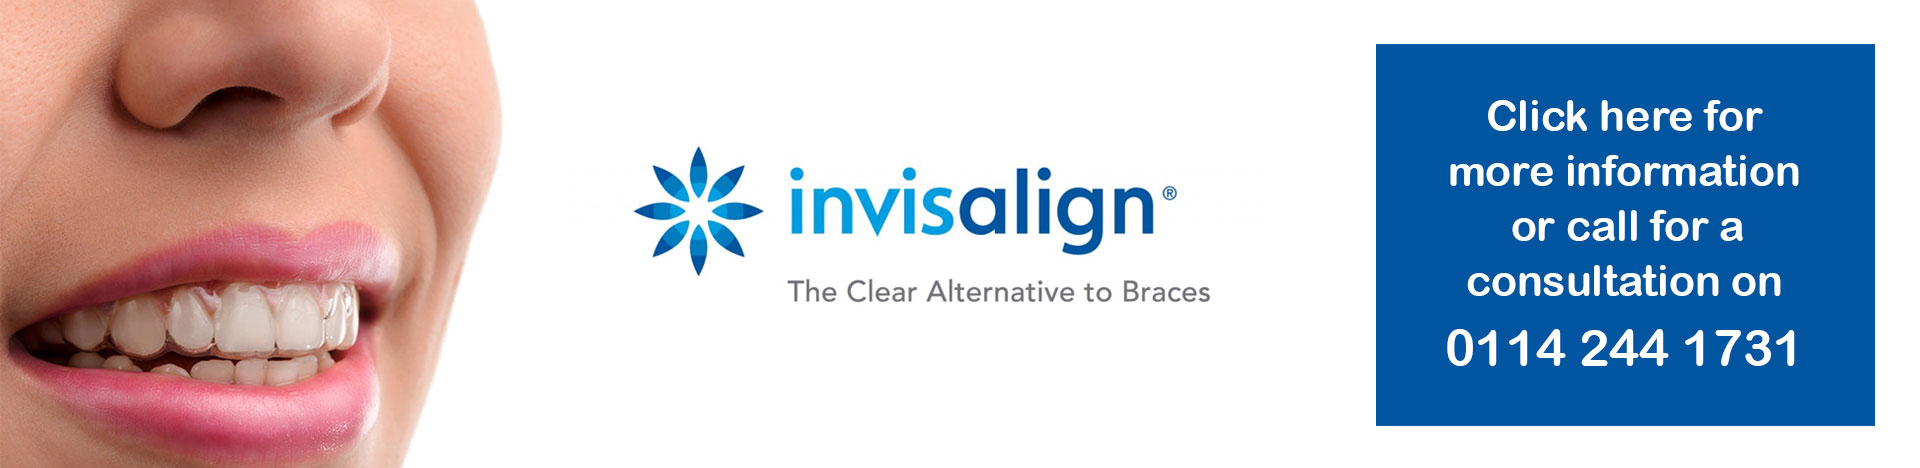 Invisalign Braces available at Darnall Dental Clinic